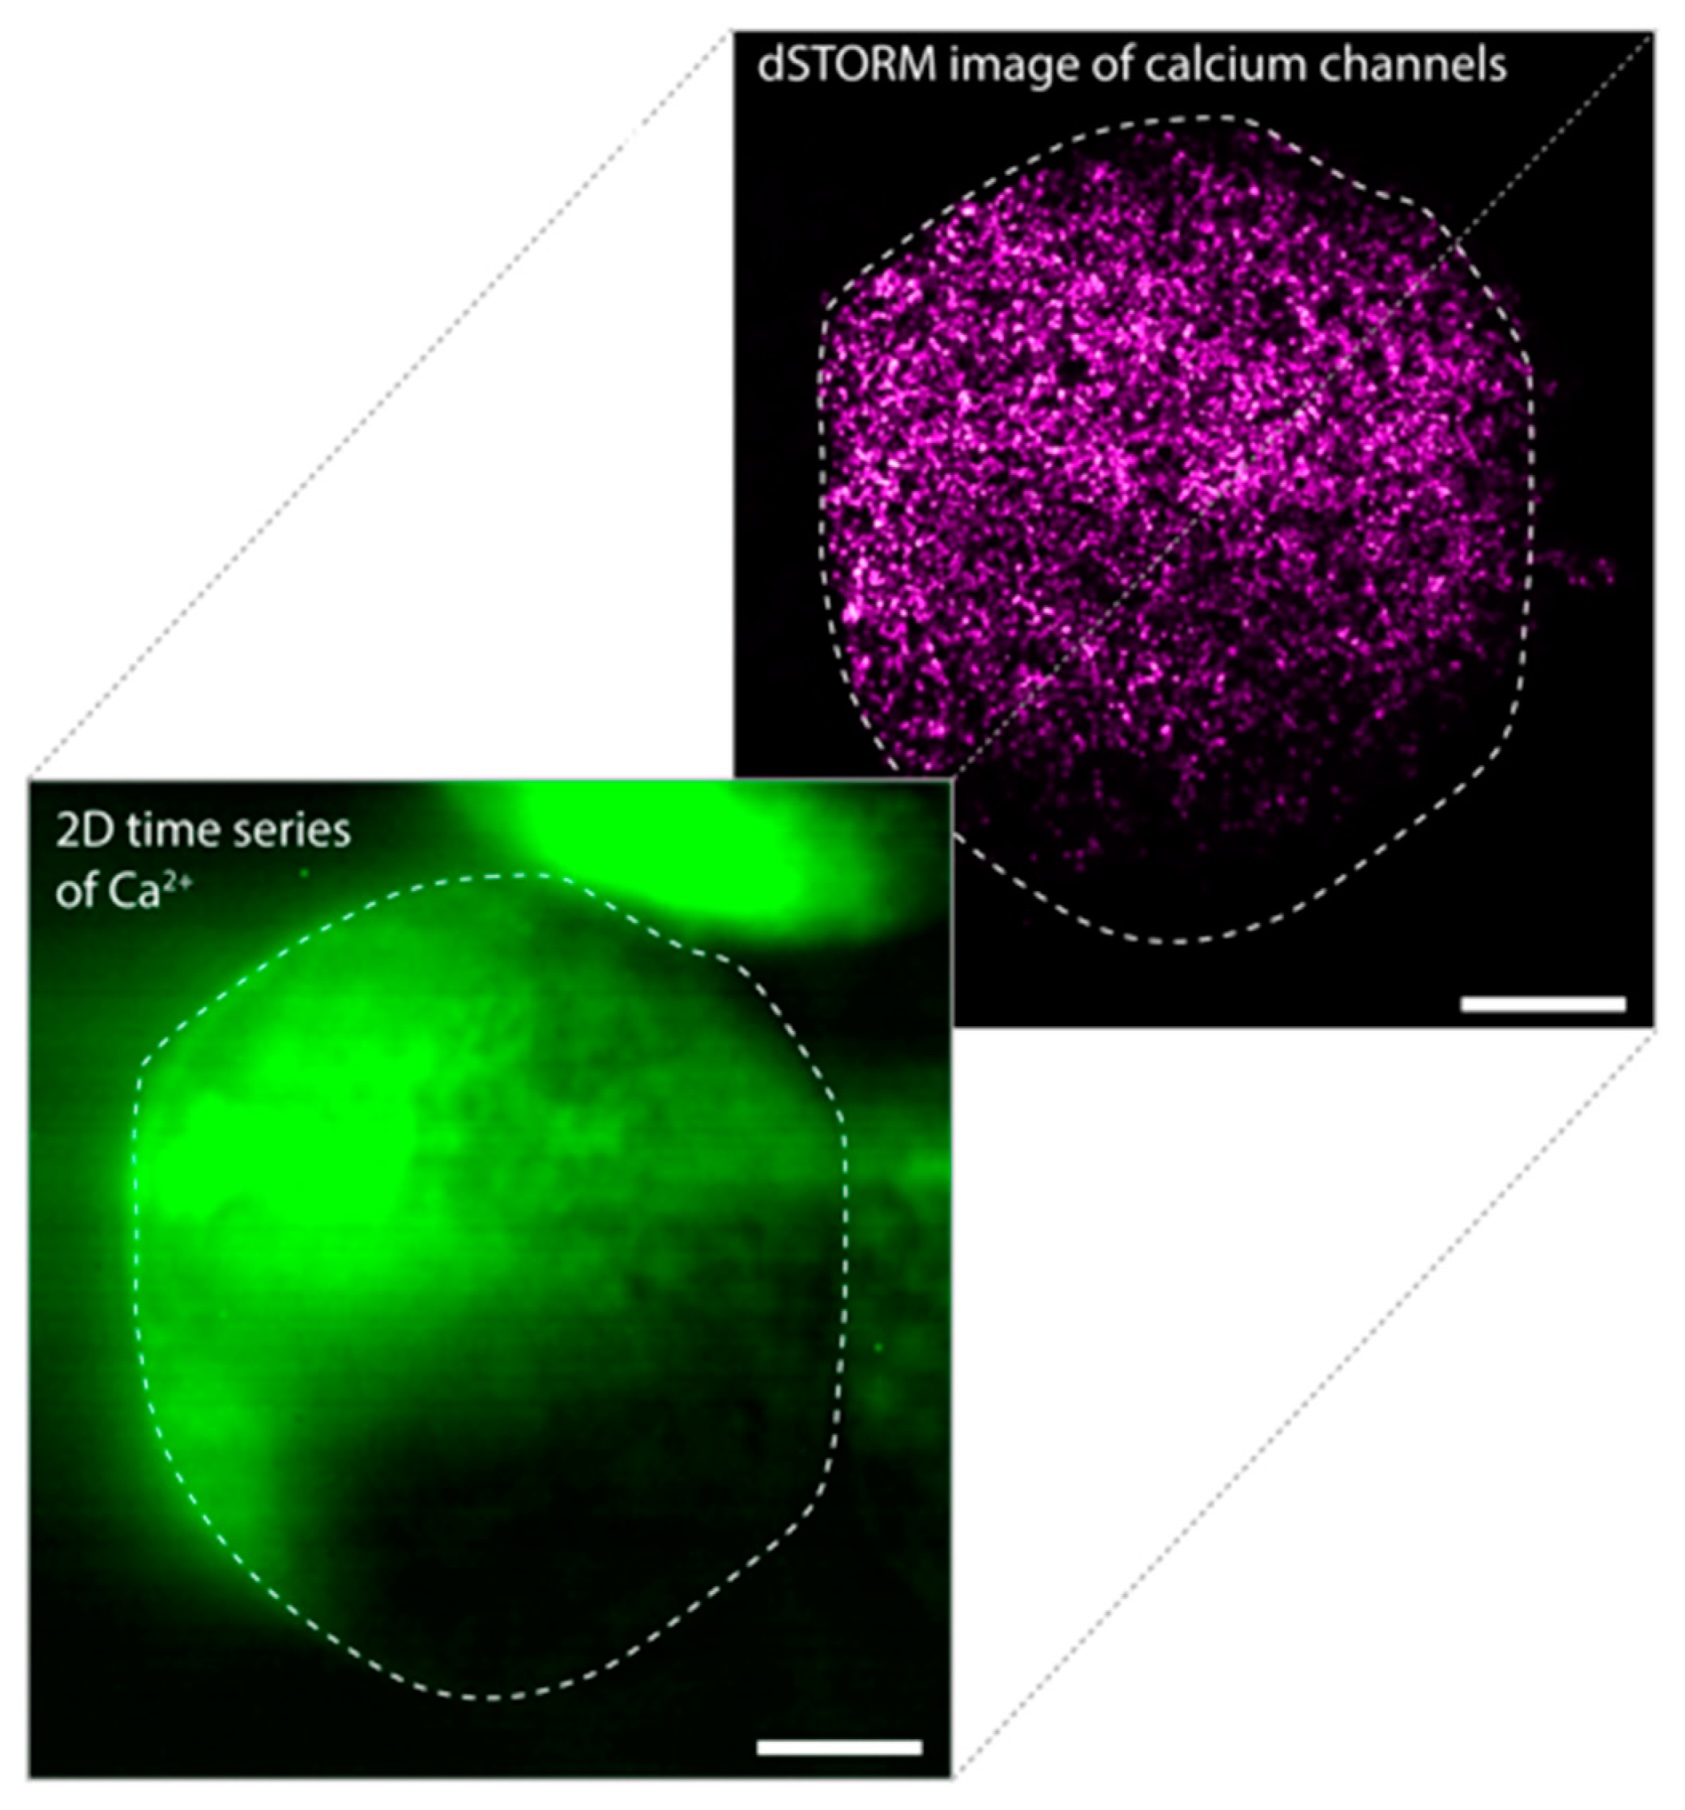 Super-Resolution Analysis of the Origins of the Elementary Events of ER Calcium Release in Dorsal Root Ganglion Neurons